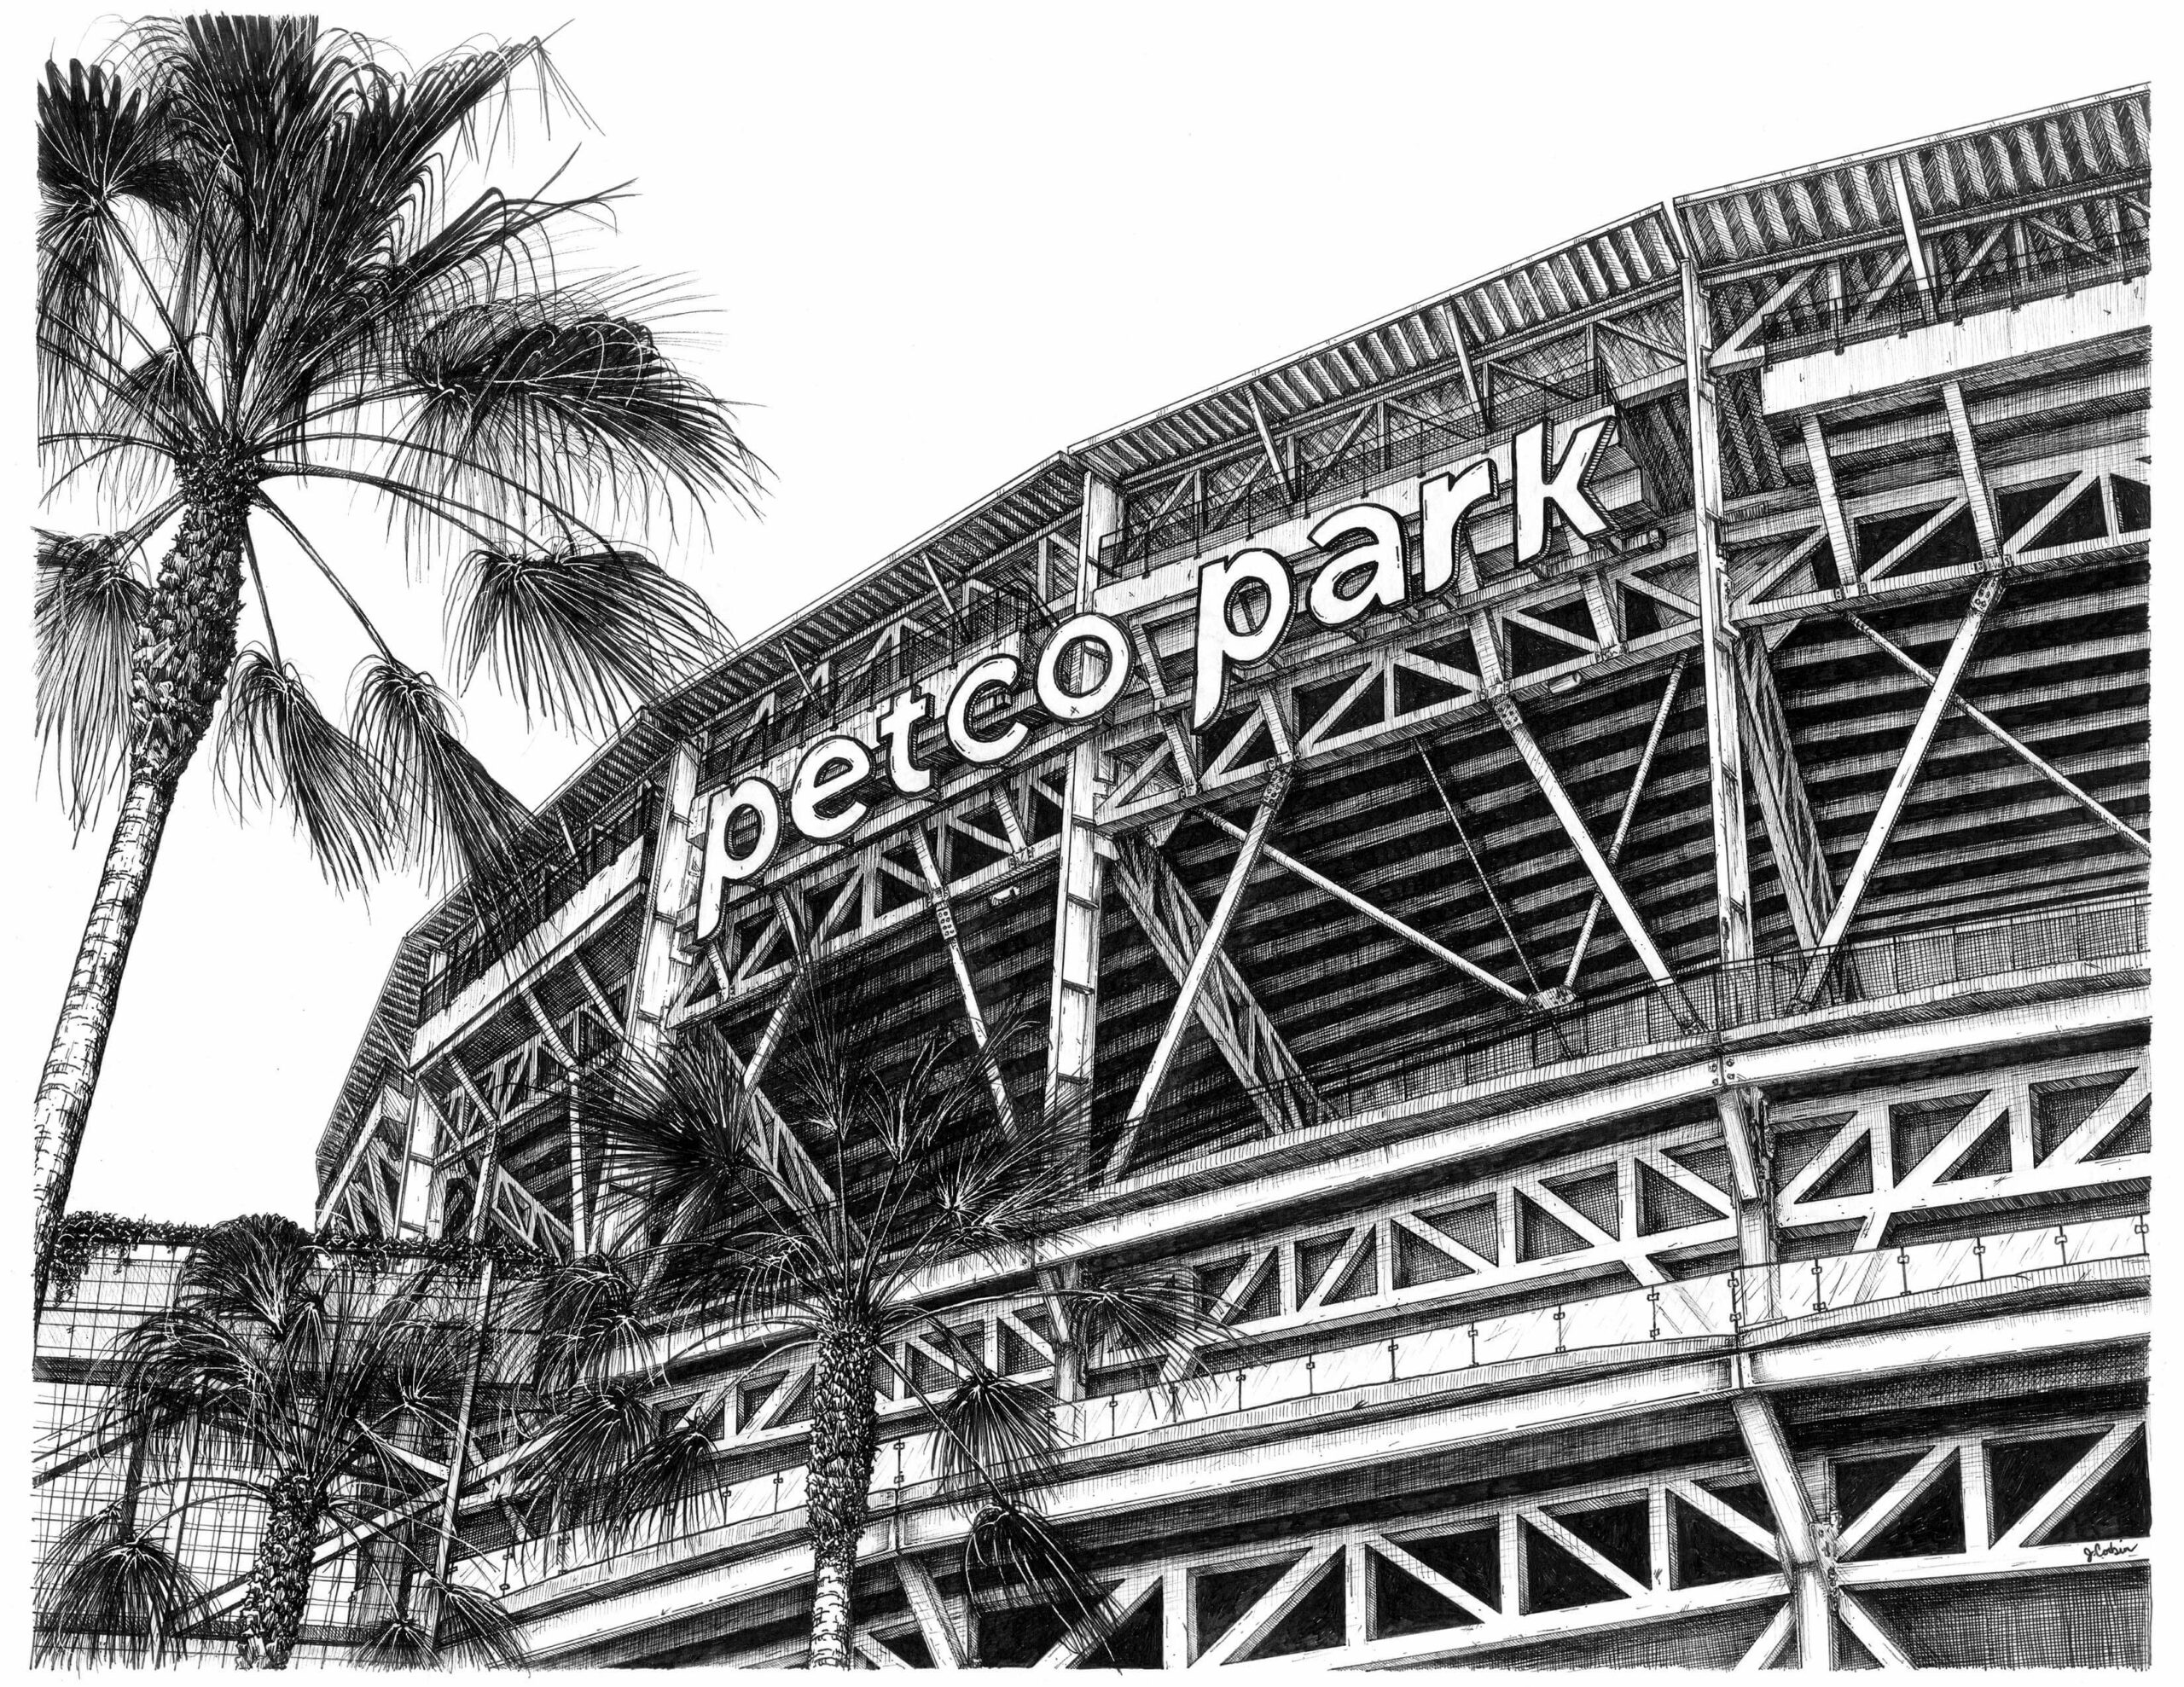 A black and white ink illustration of the Petco Park Exterior